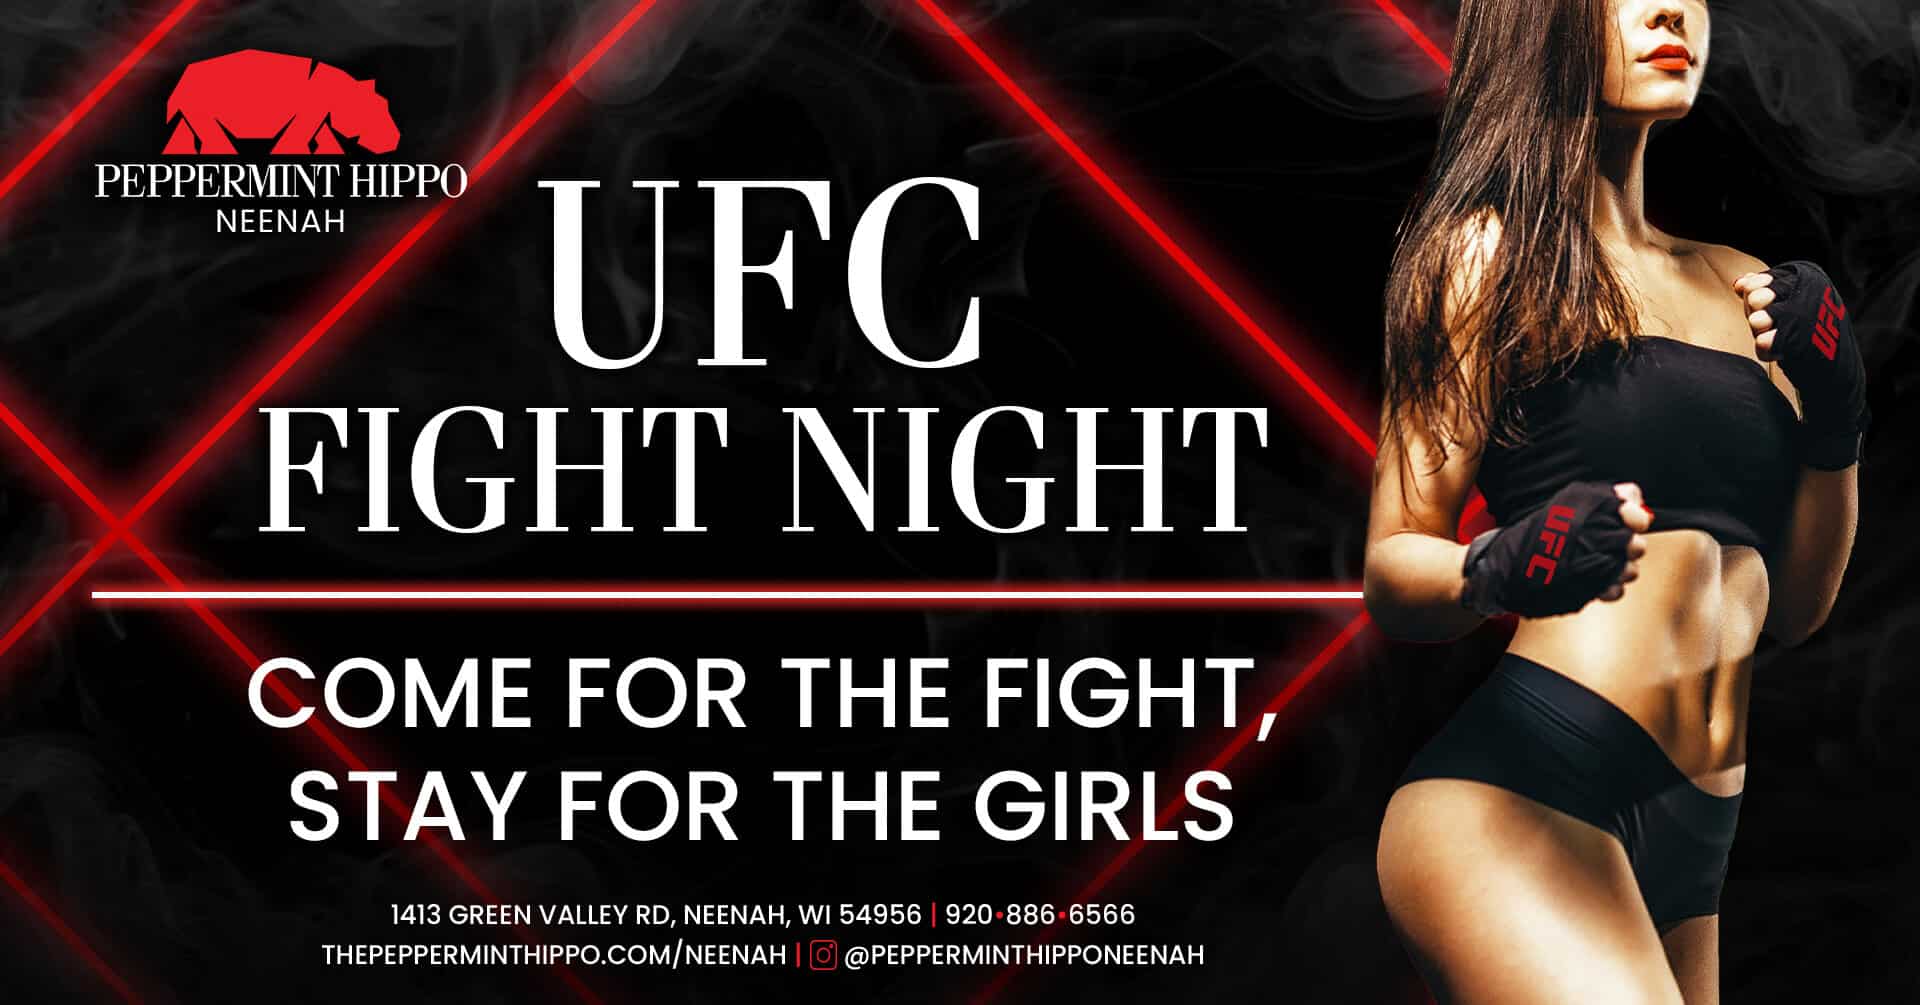 UFC Fight Night at Peppermint Hippo Neenah